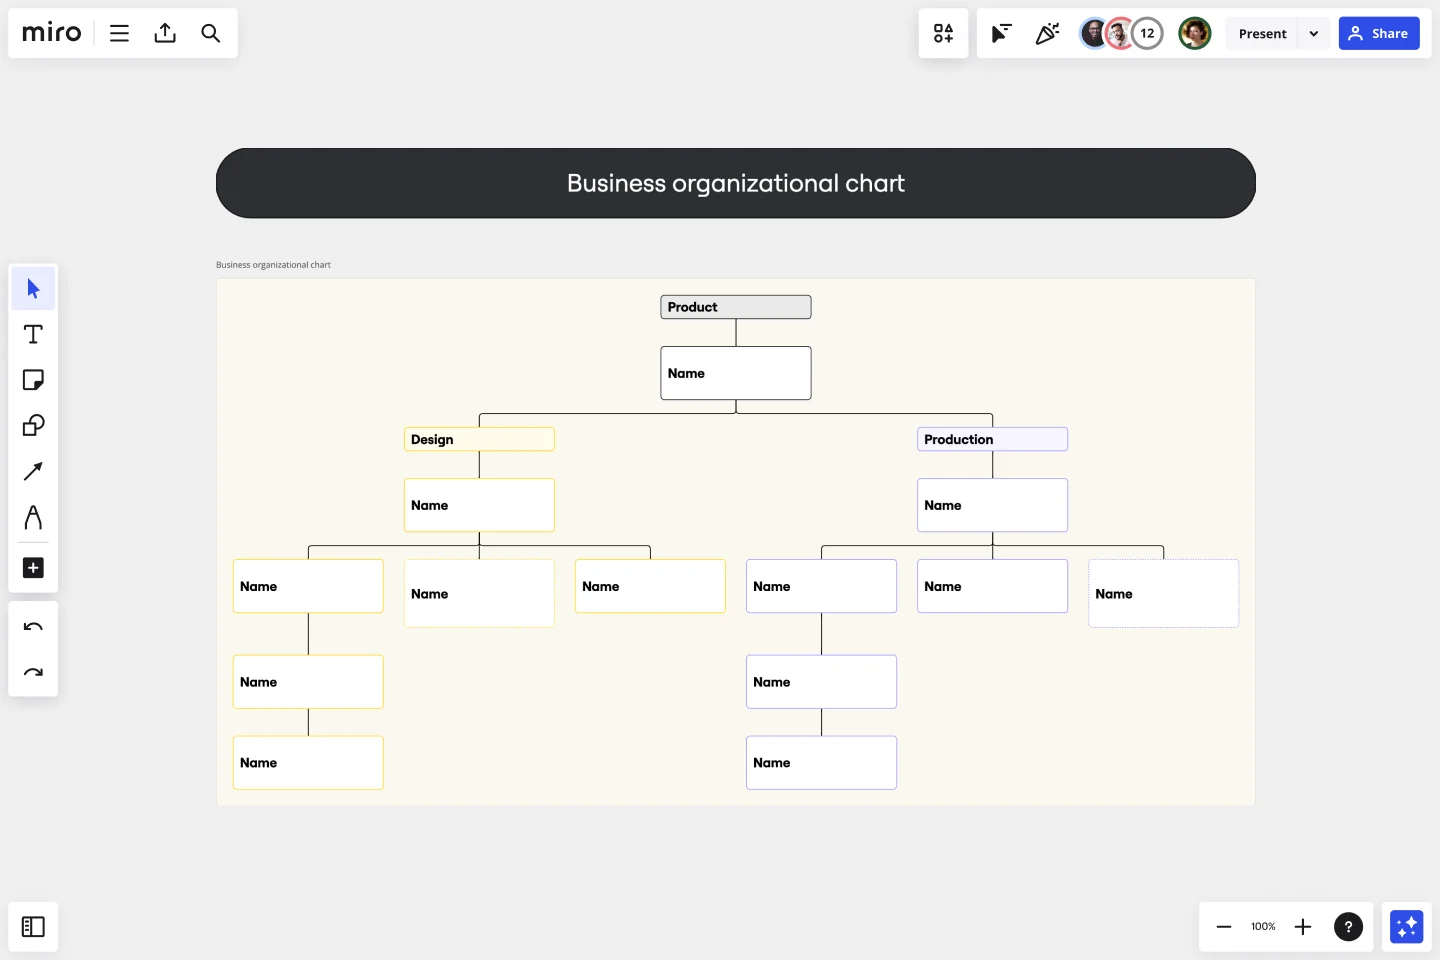 Business Organizational Chart Template & Example for Teams | Miro